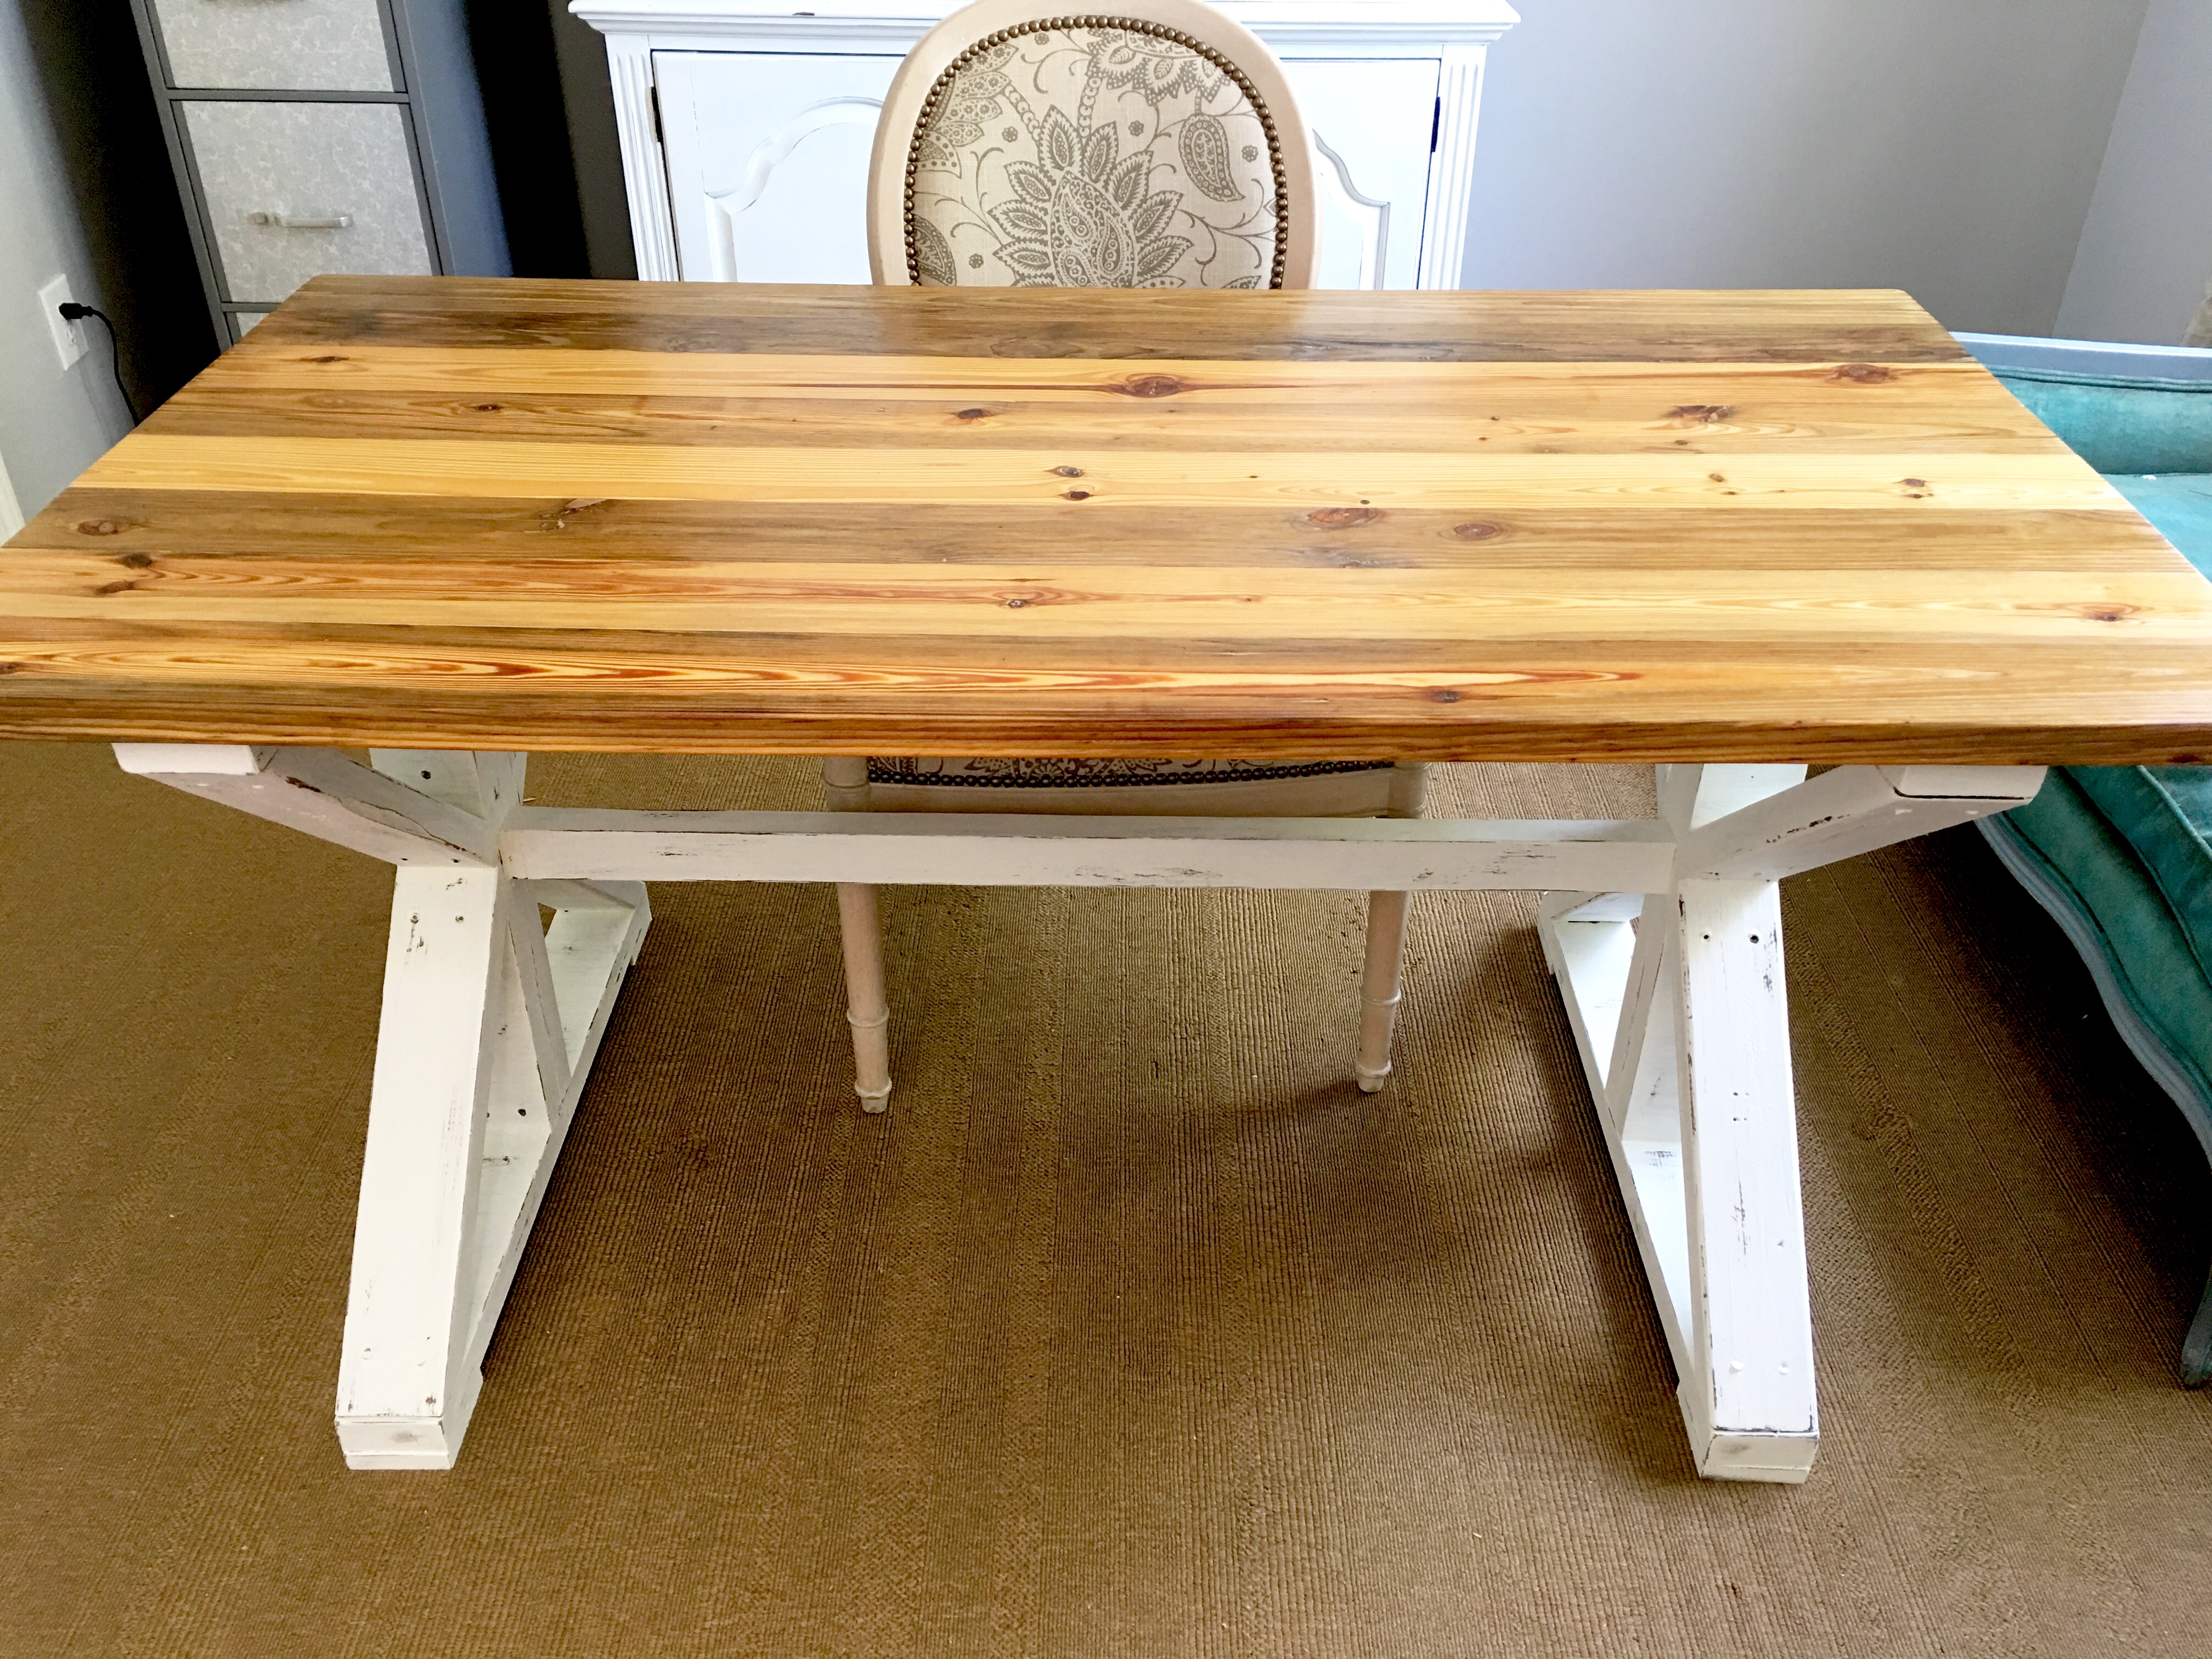 staining - Can I decorate linseed oil treated wood table with a